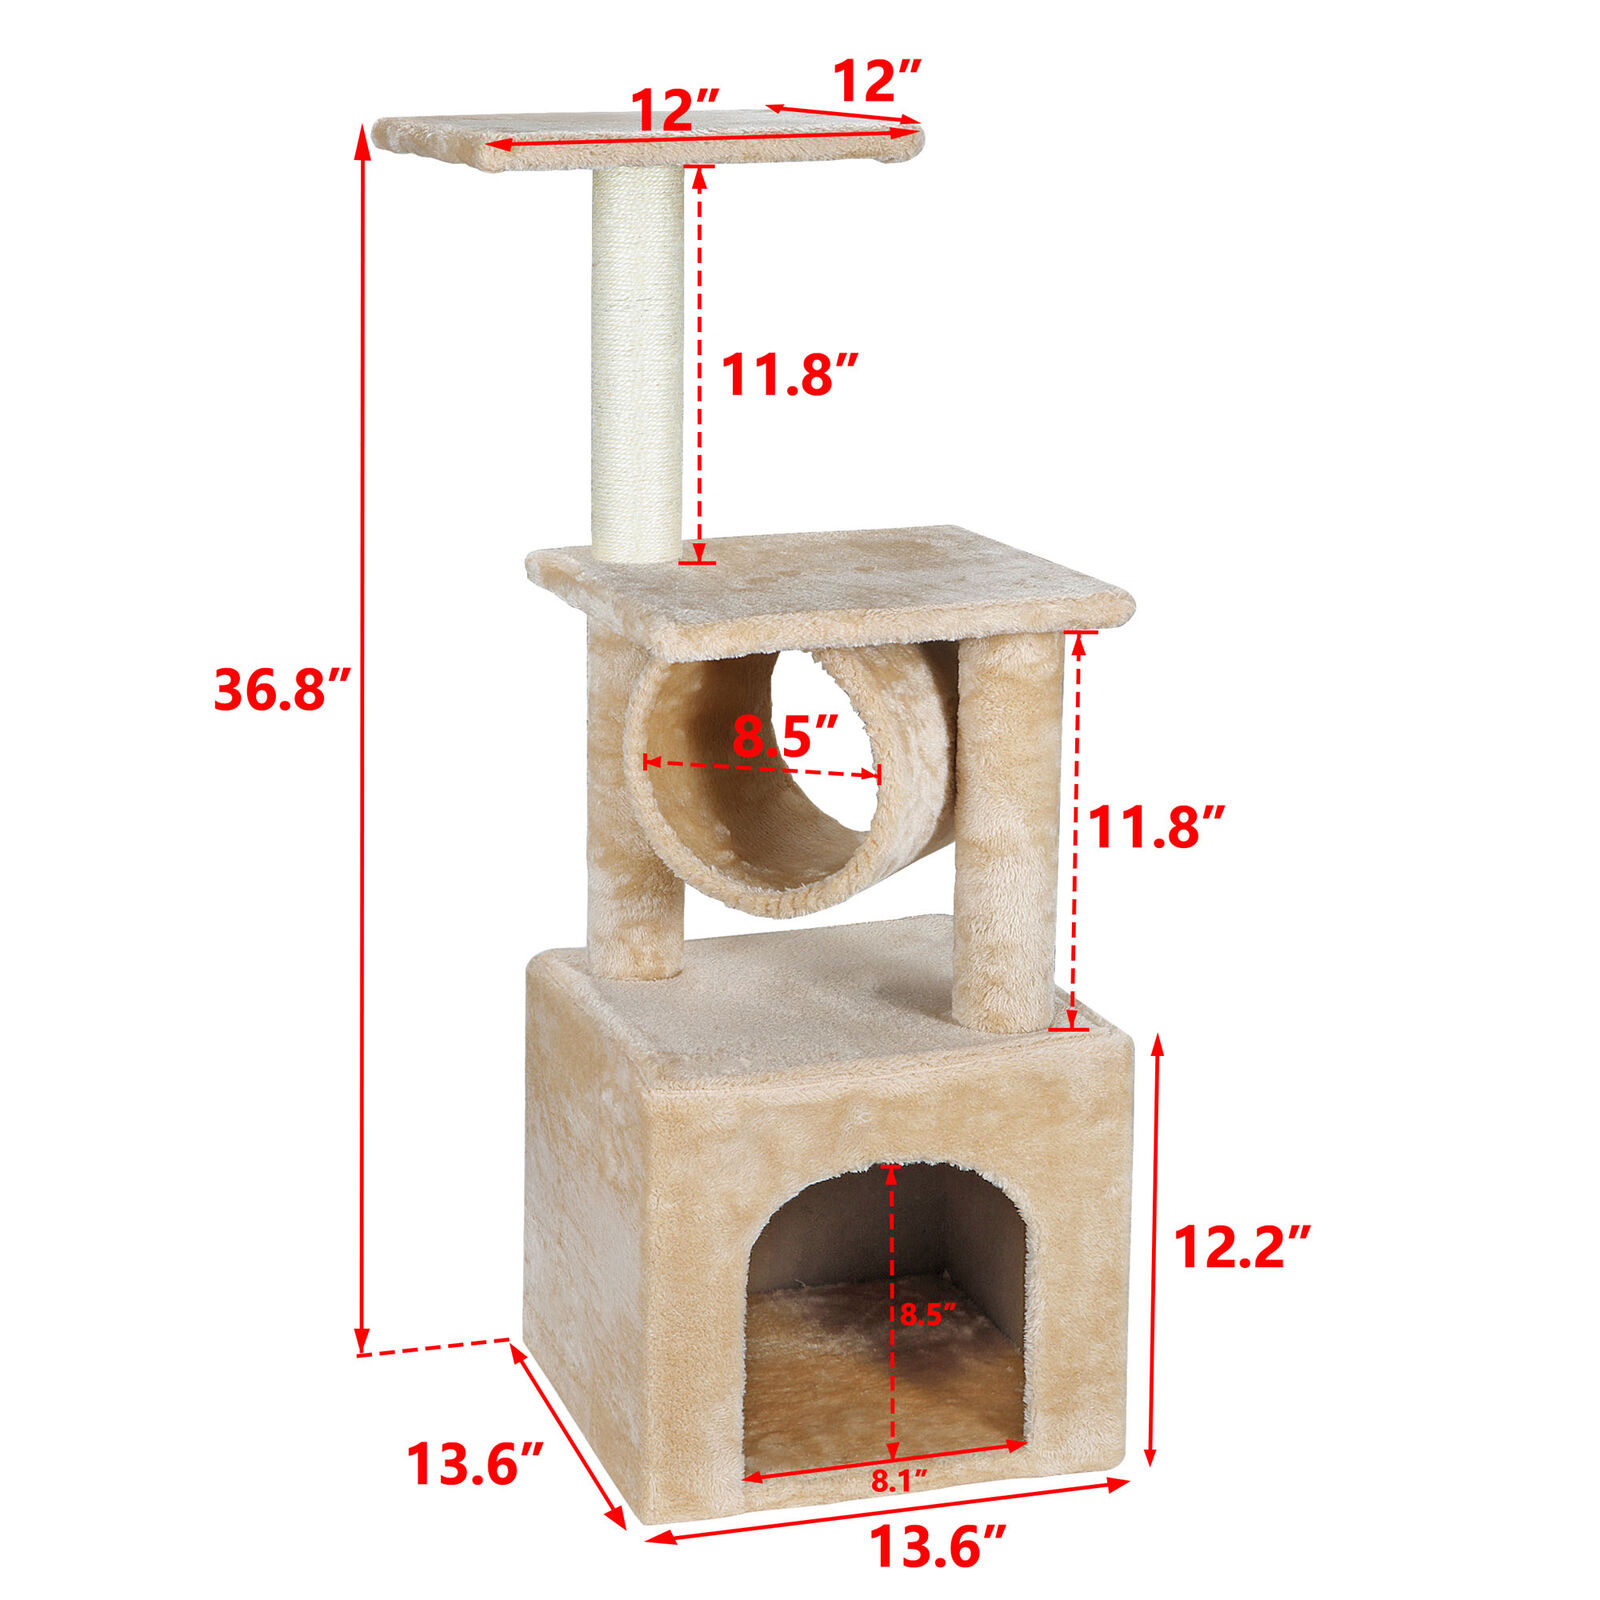 Multiple Sizes Cat Tree Tower Condo Furniture Scratch Post Tree Kitty Play House